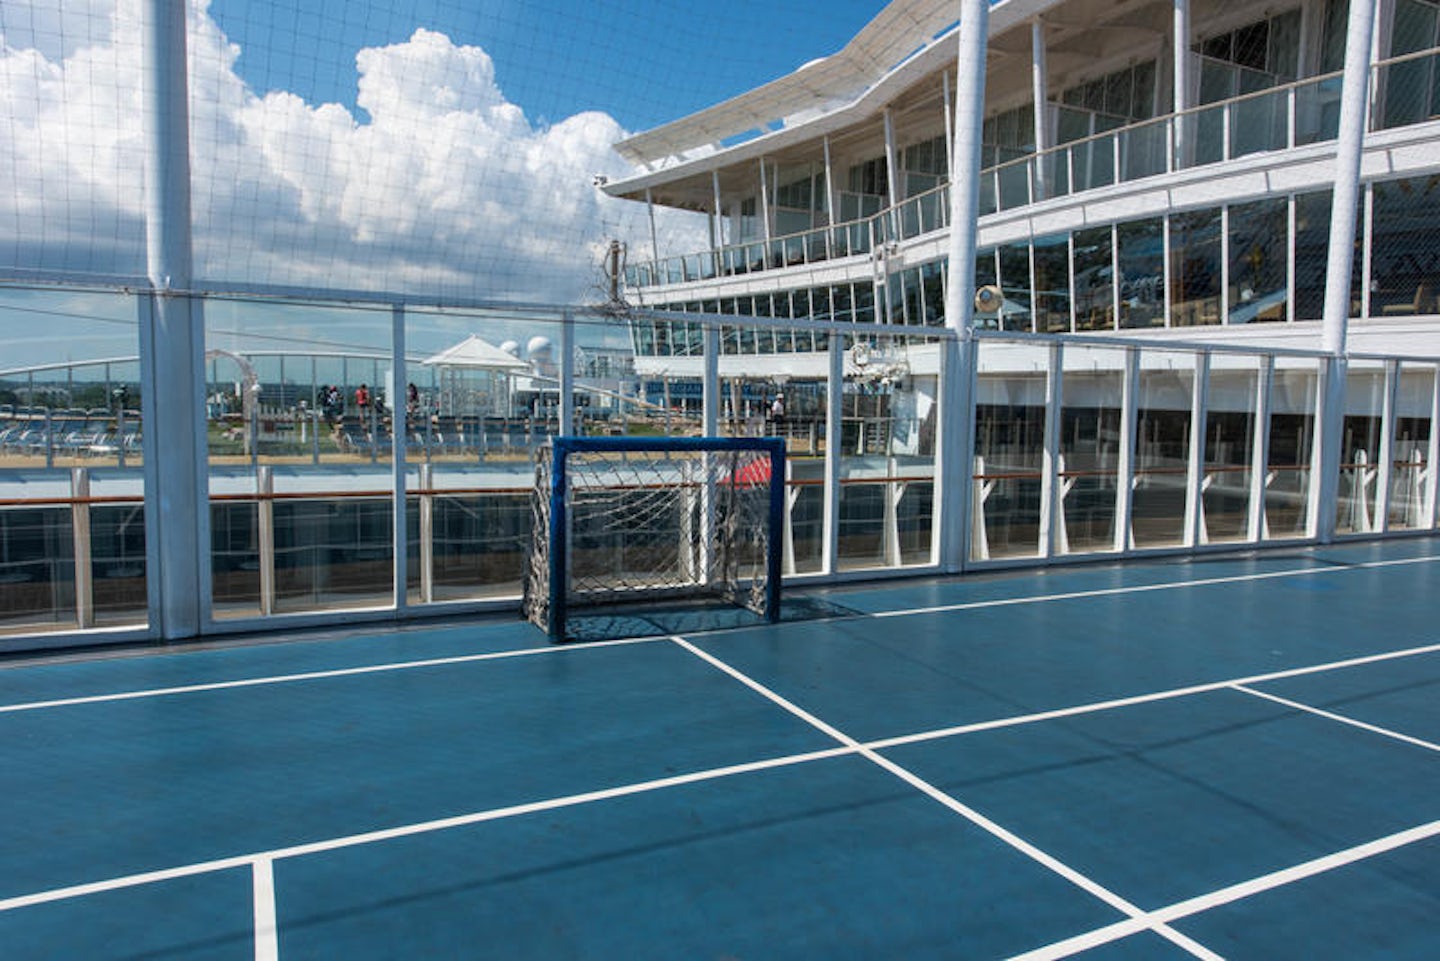 Sports Court on Oasis of the Seas